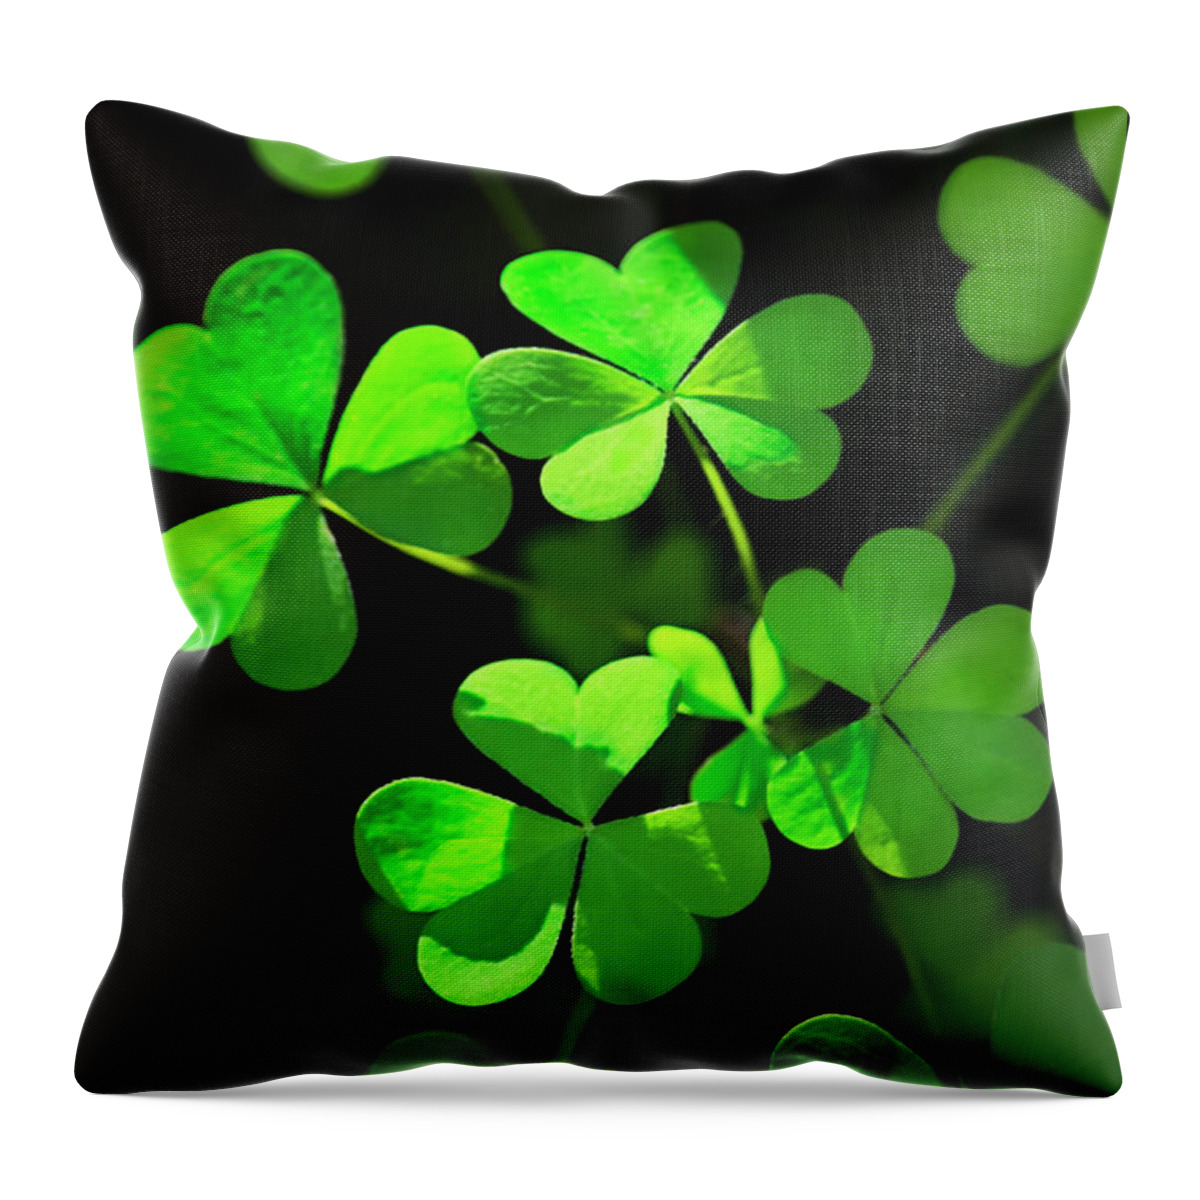 Clover Throw Pillow featuring the photograph Perfect Green Shamrock Clovers by Christina Rollo